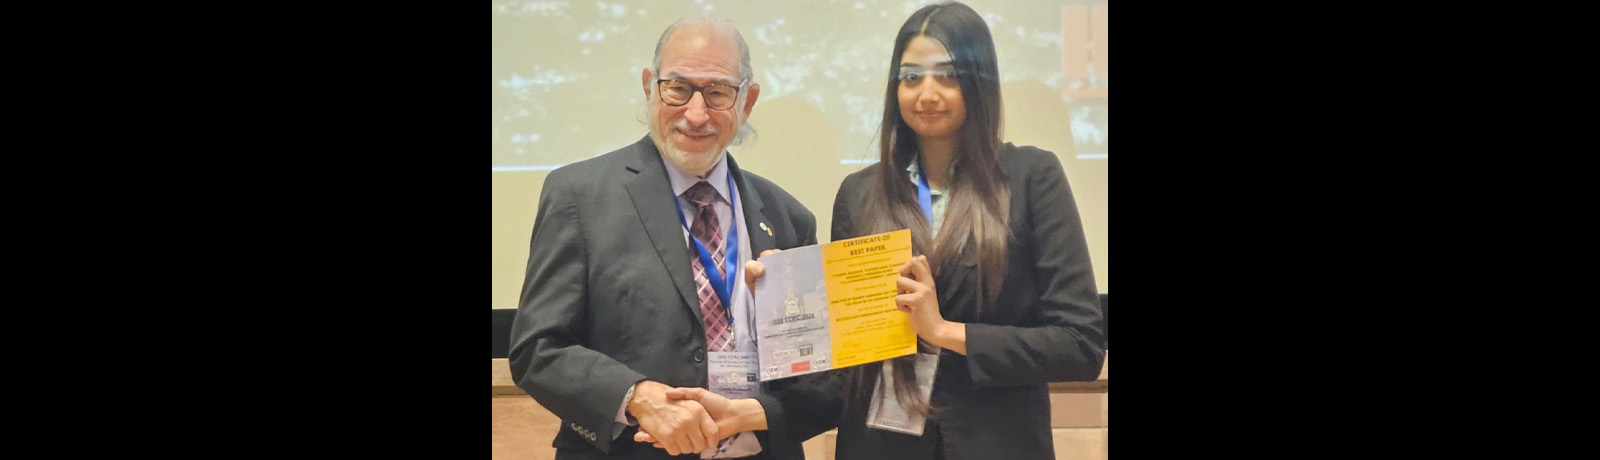 Ayesha Khan receives the Best Paper award on stage, presented by a man in a black suit.